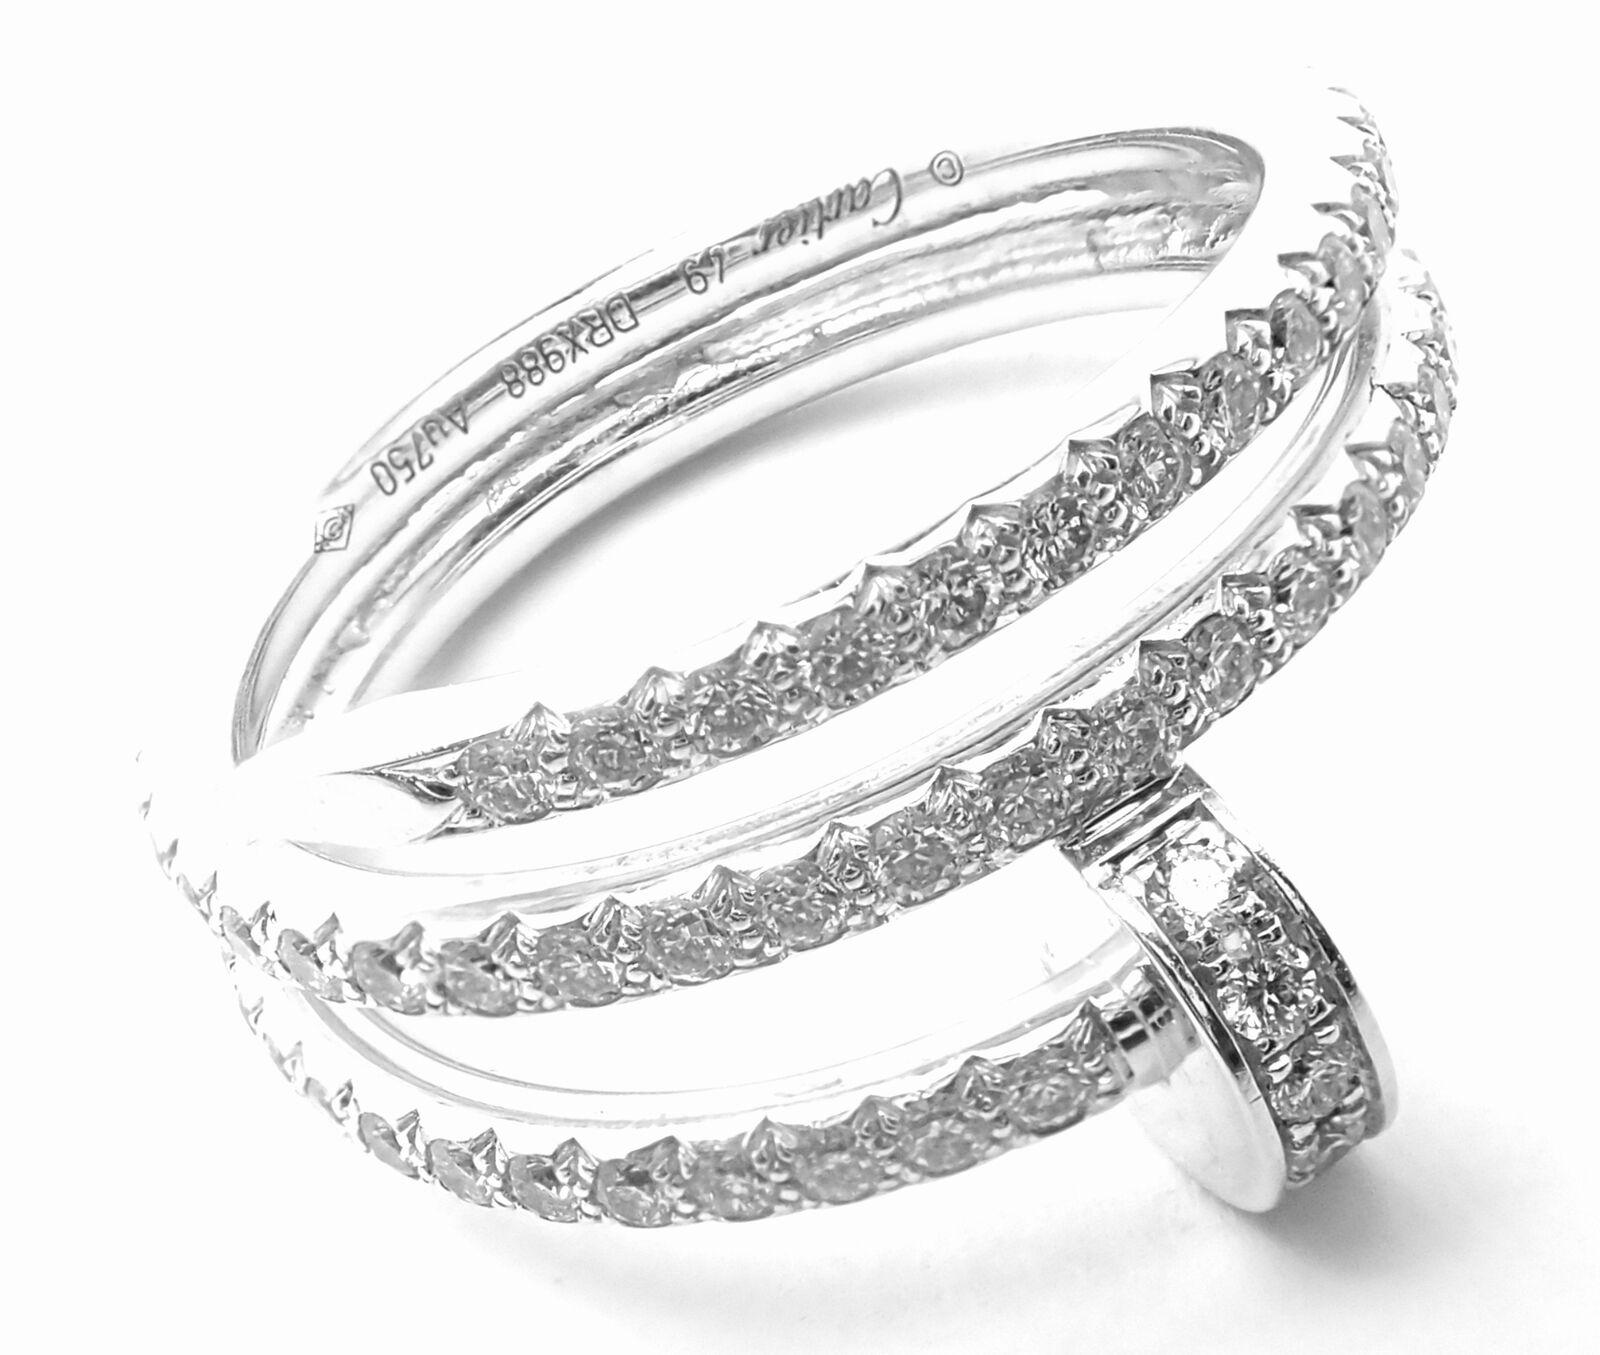 18k White Gold Diamond Juste un Clou Nail Band Ring by Cartier.
With 77 round brilliant cut diamonds VVS1 clarity, E color total weight approximately 0.59ct 
Details:
Size: European 49, US 4.75
Weight: 4.9 grams
Width: 11mm
Stamped Hallmarks: 750